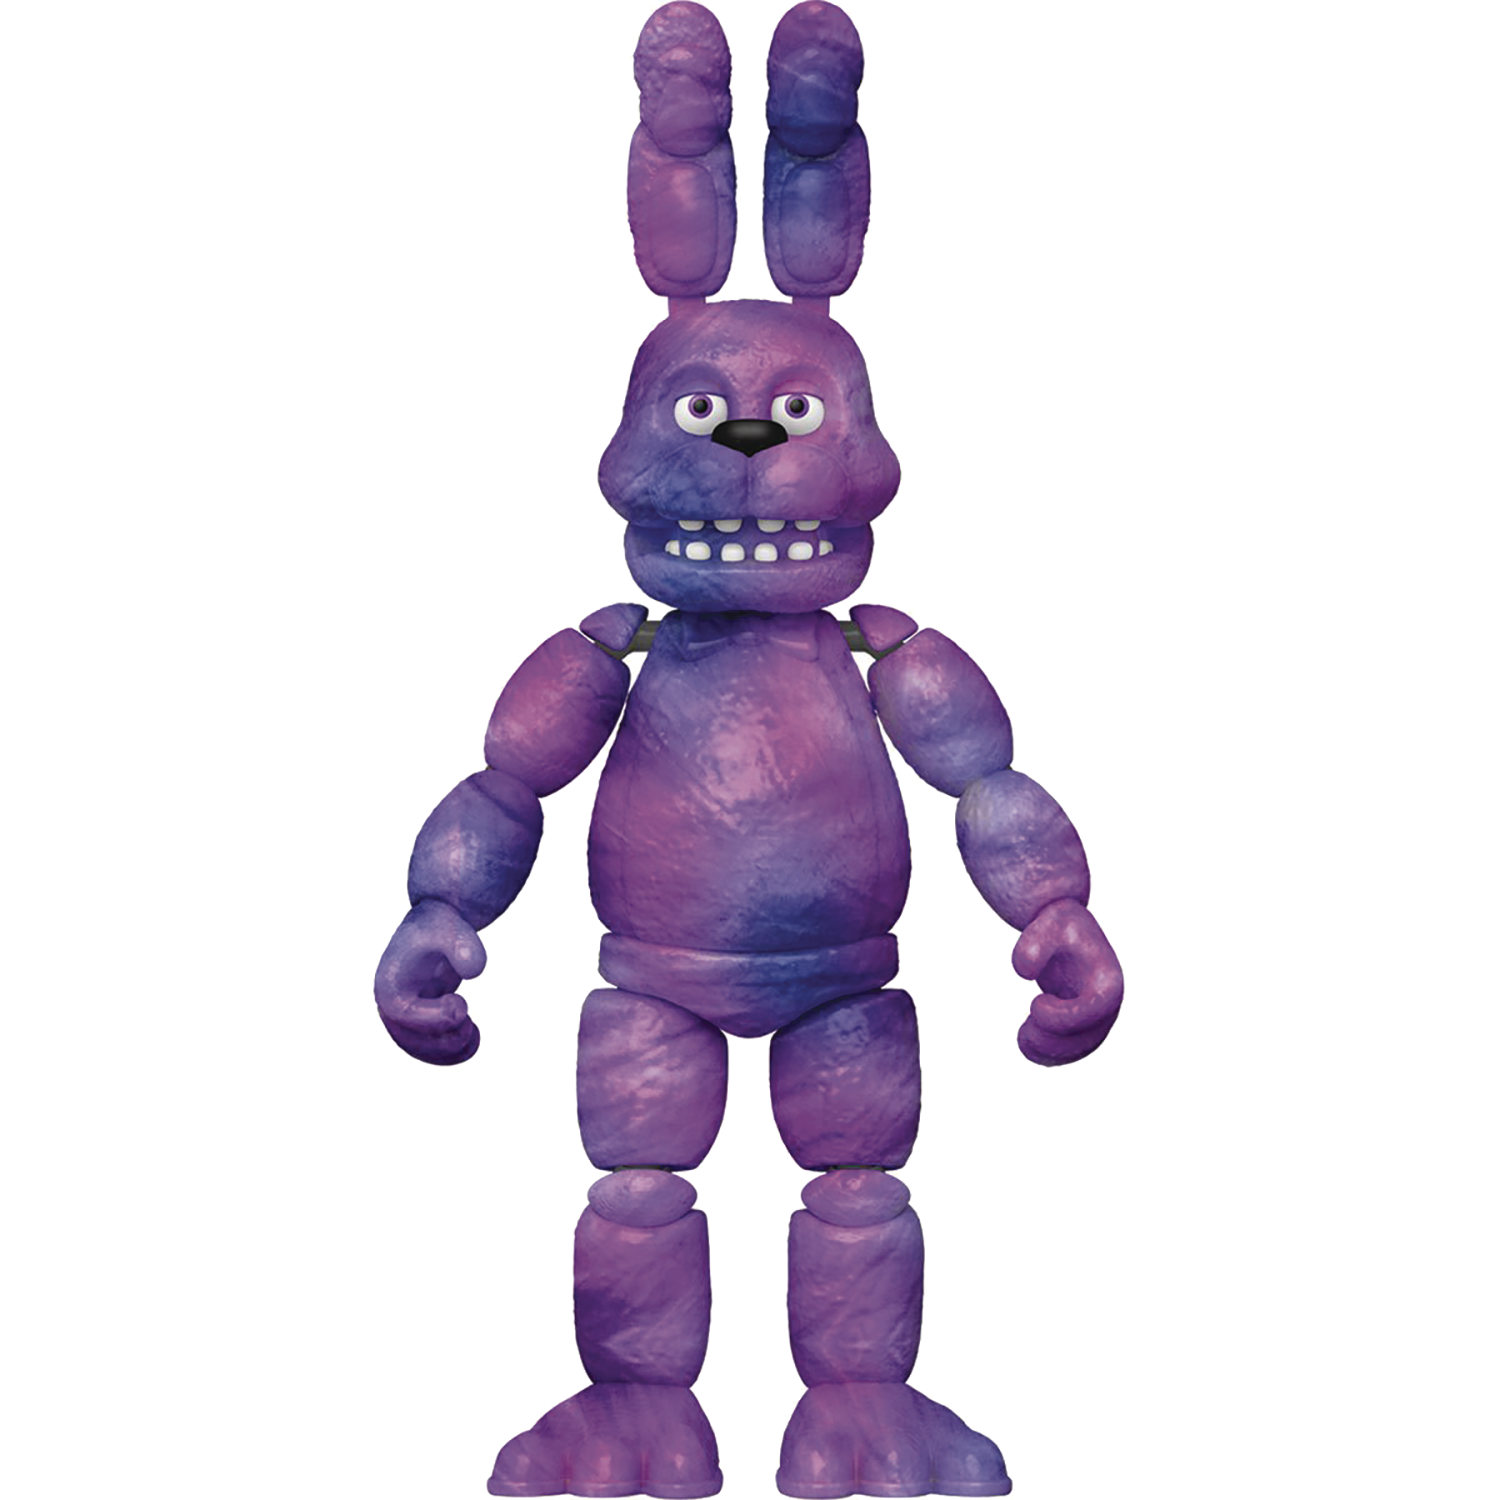 Five Nights At Freddys Tiedye Bonnie Action Figure